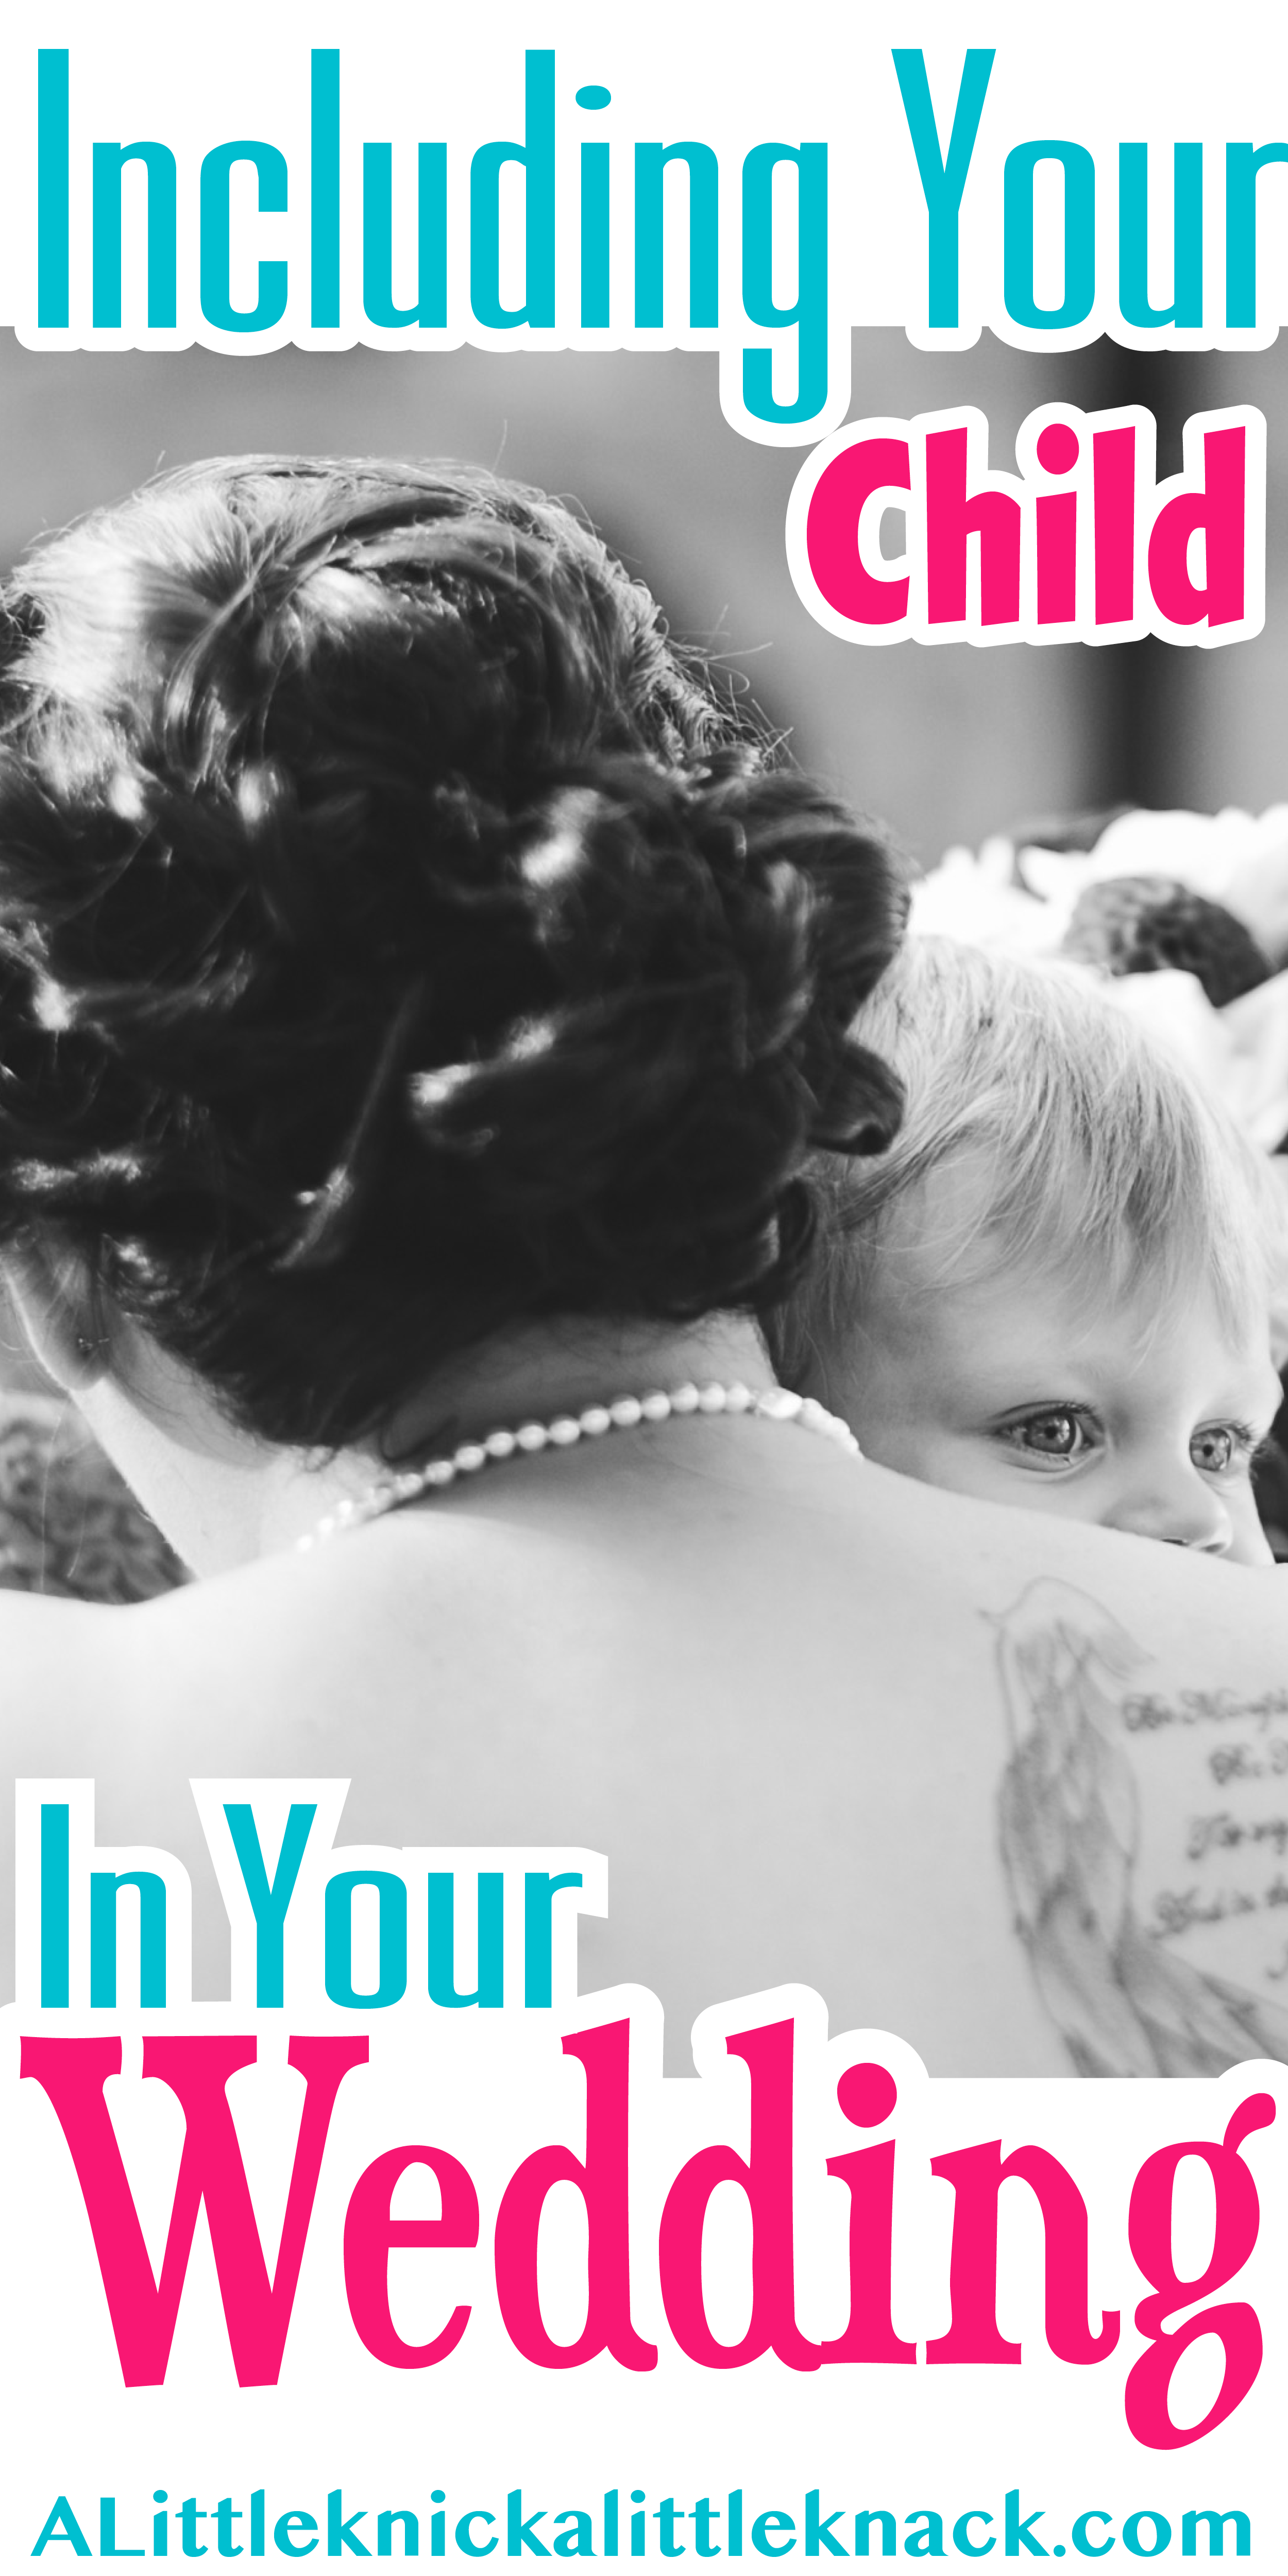 A black and white image of a bride hugging her child with a text overlay